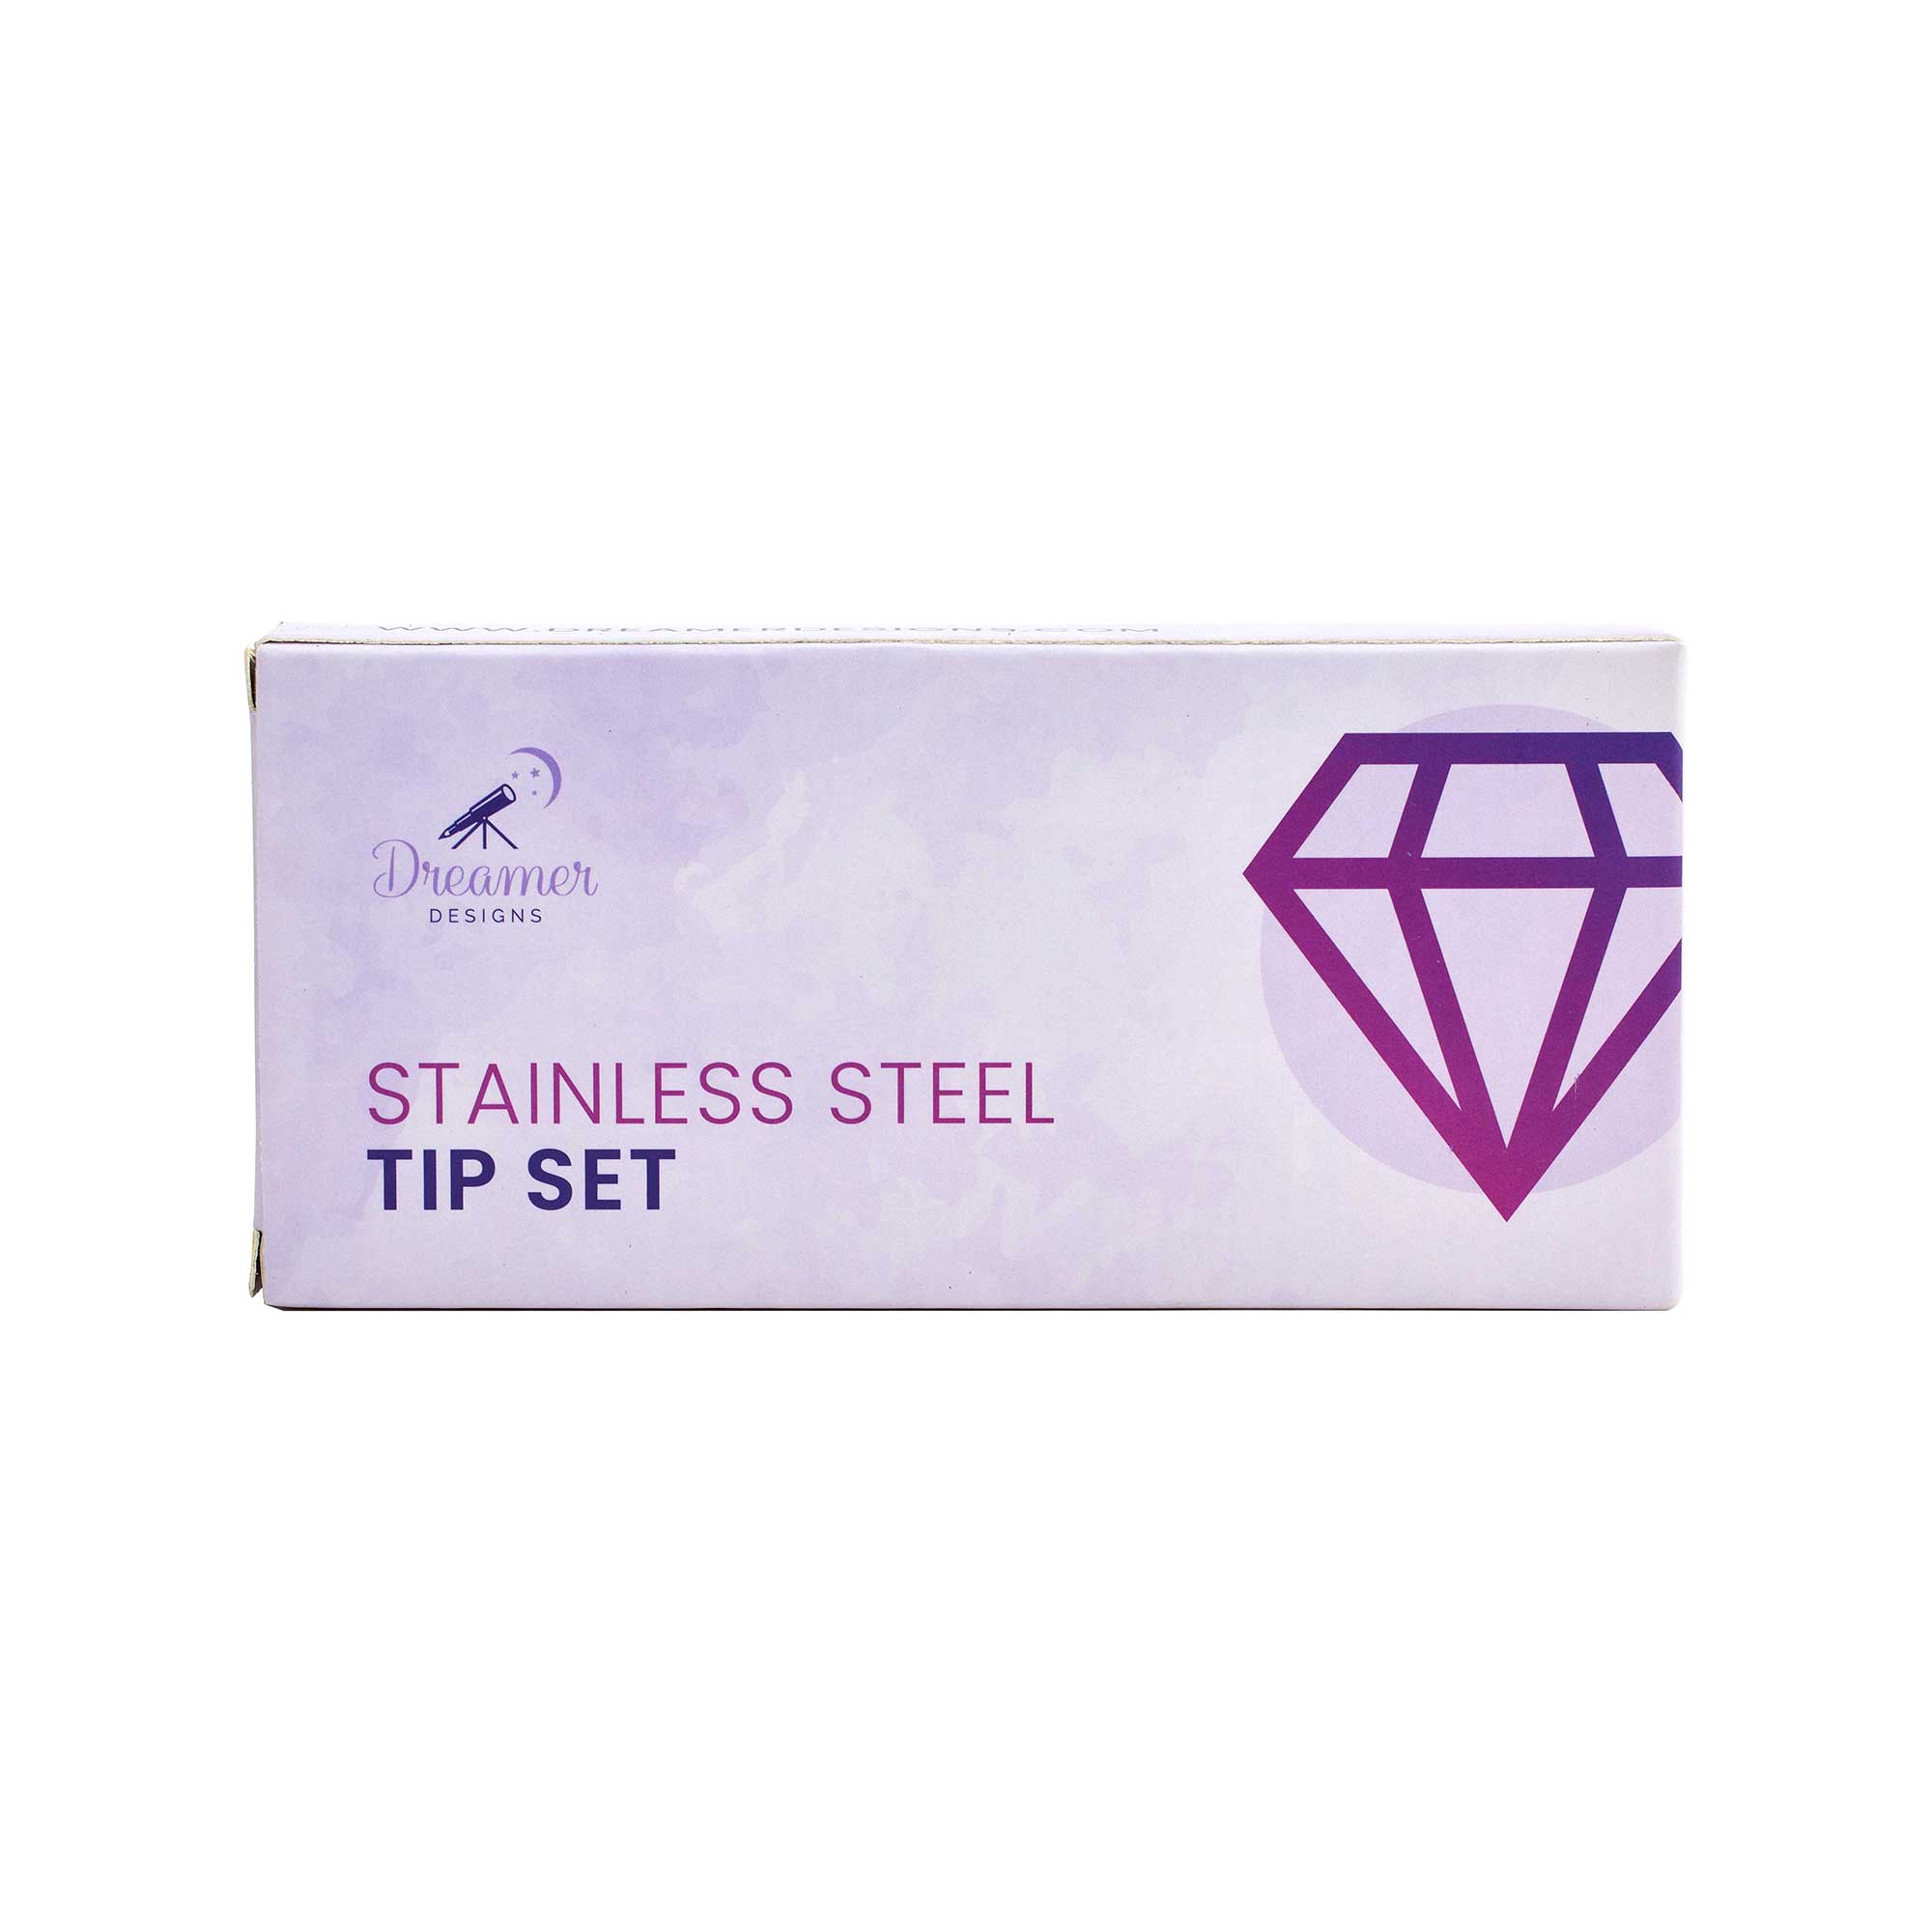 Stainless Tip Set - Straight Silver Edition